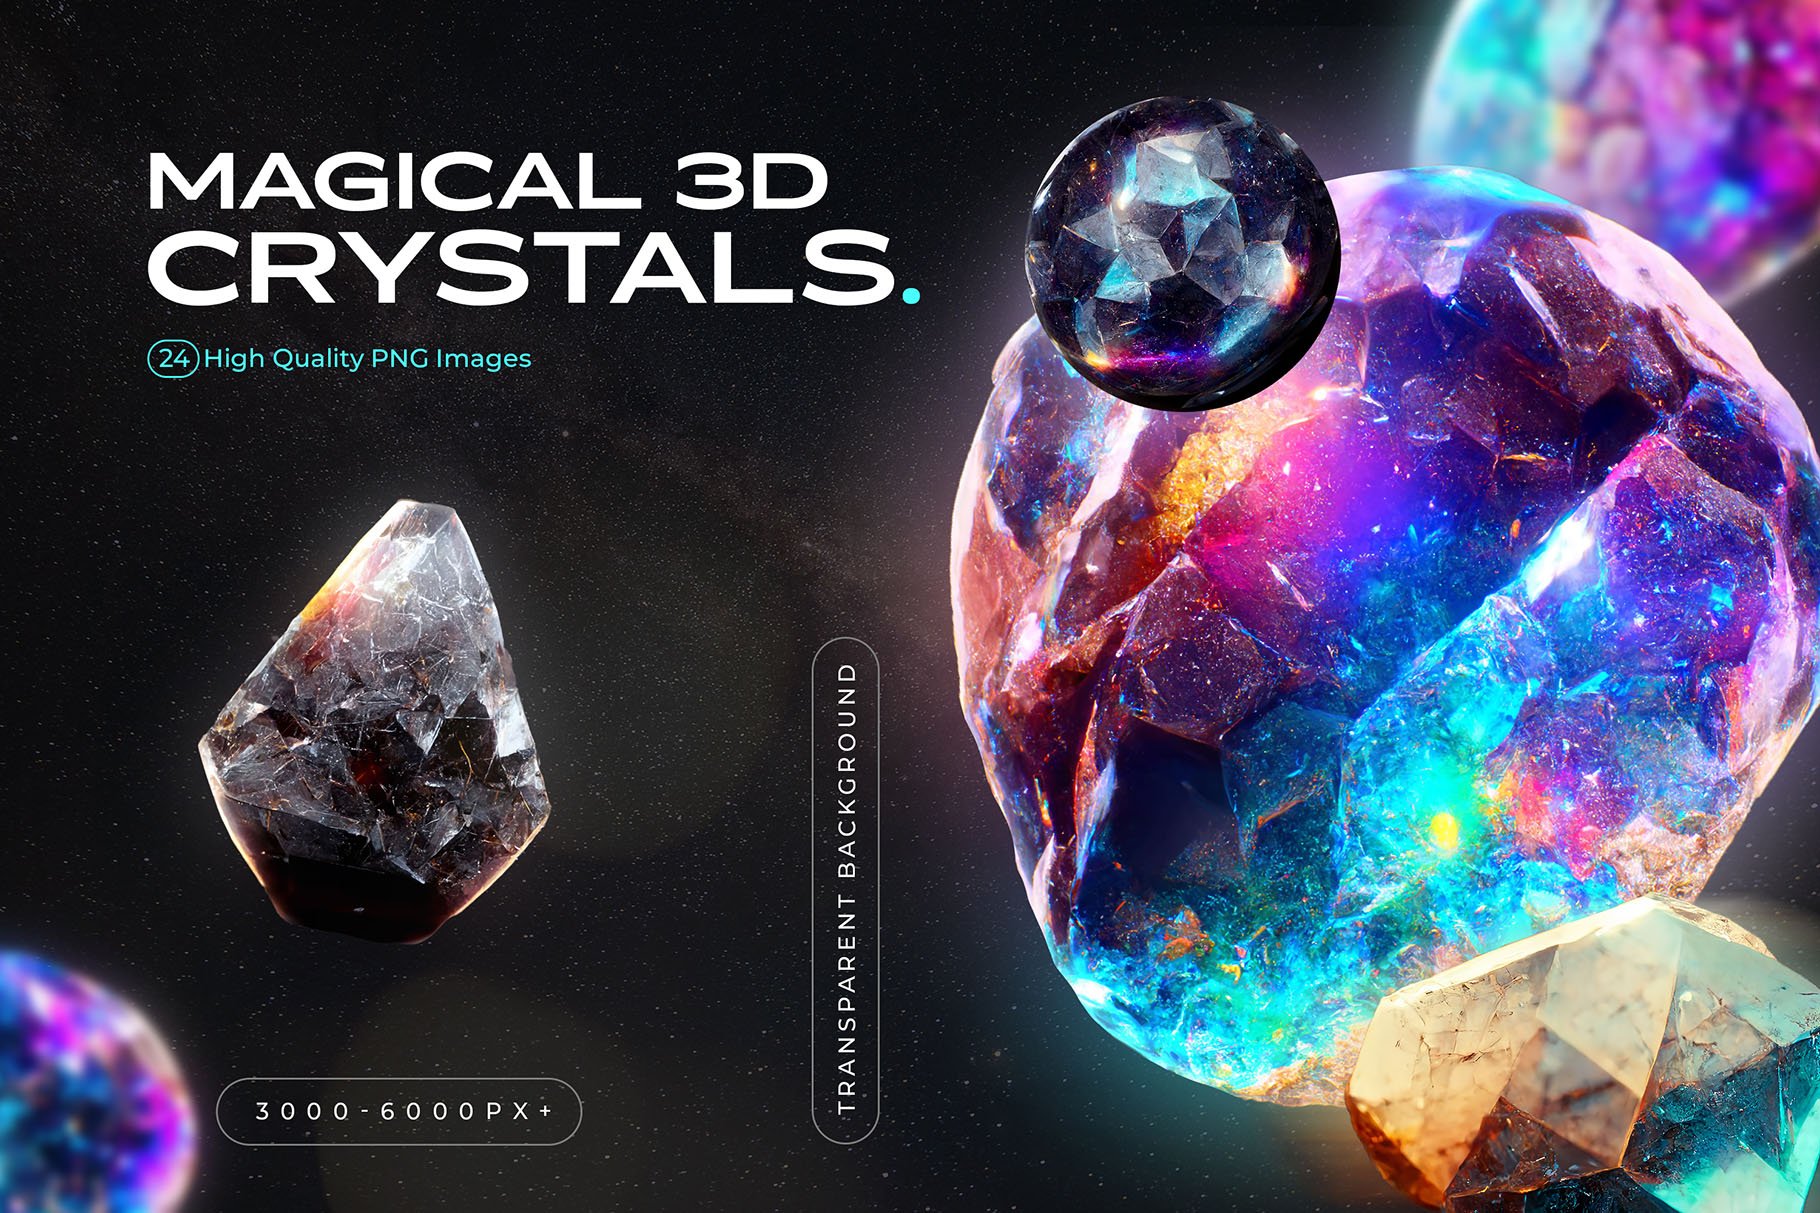 3D Gems & Crystals Collection cover image.